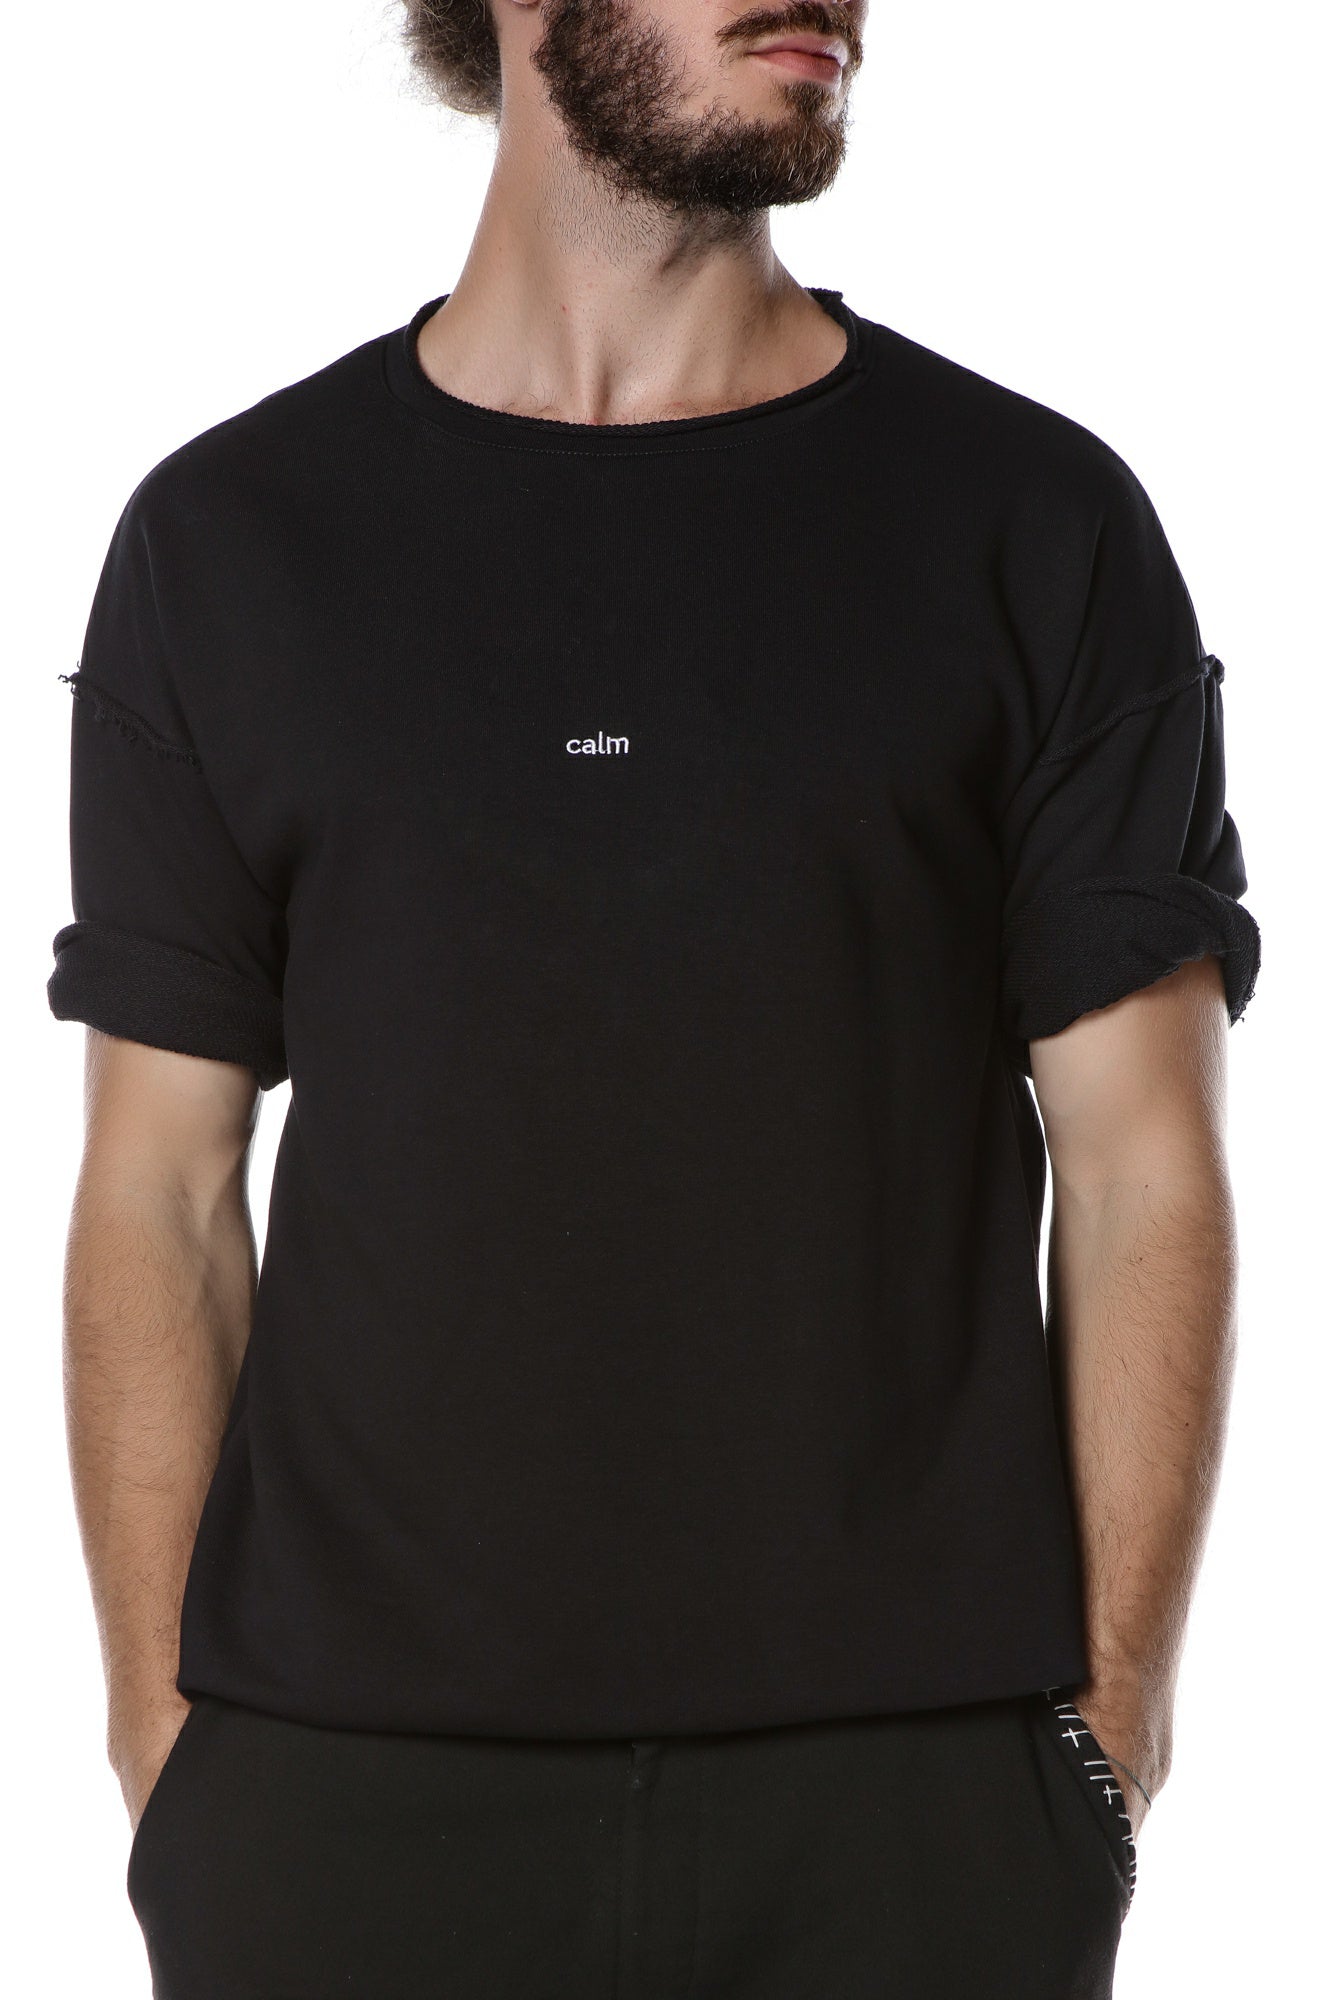 CALM embroidered BLACK T-shirt